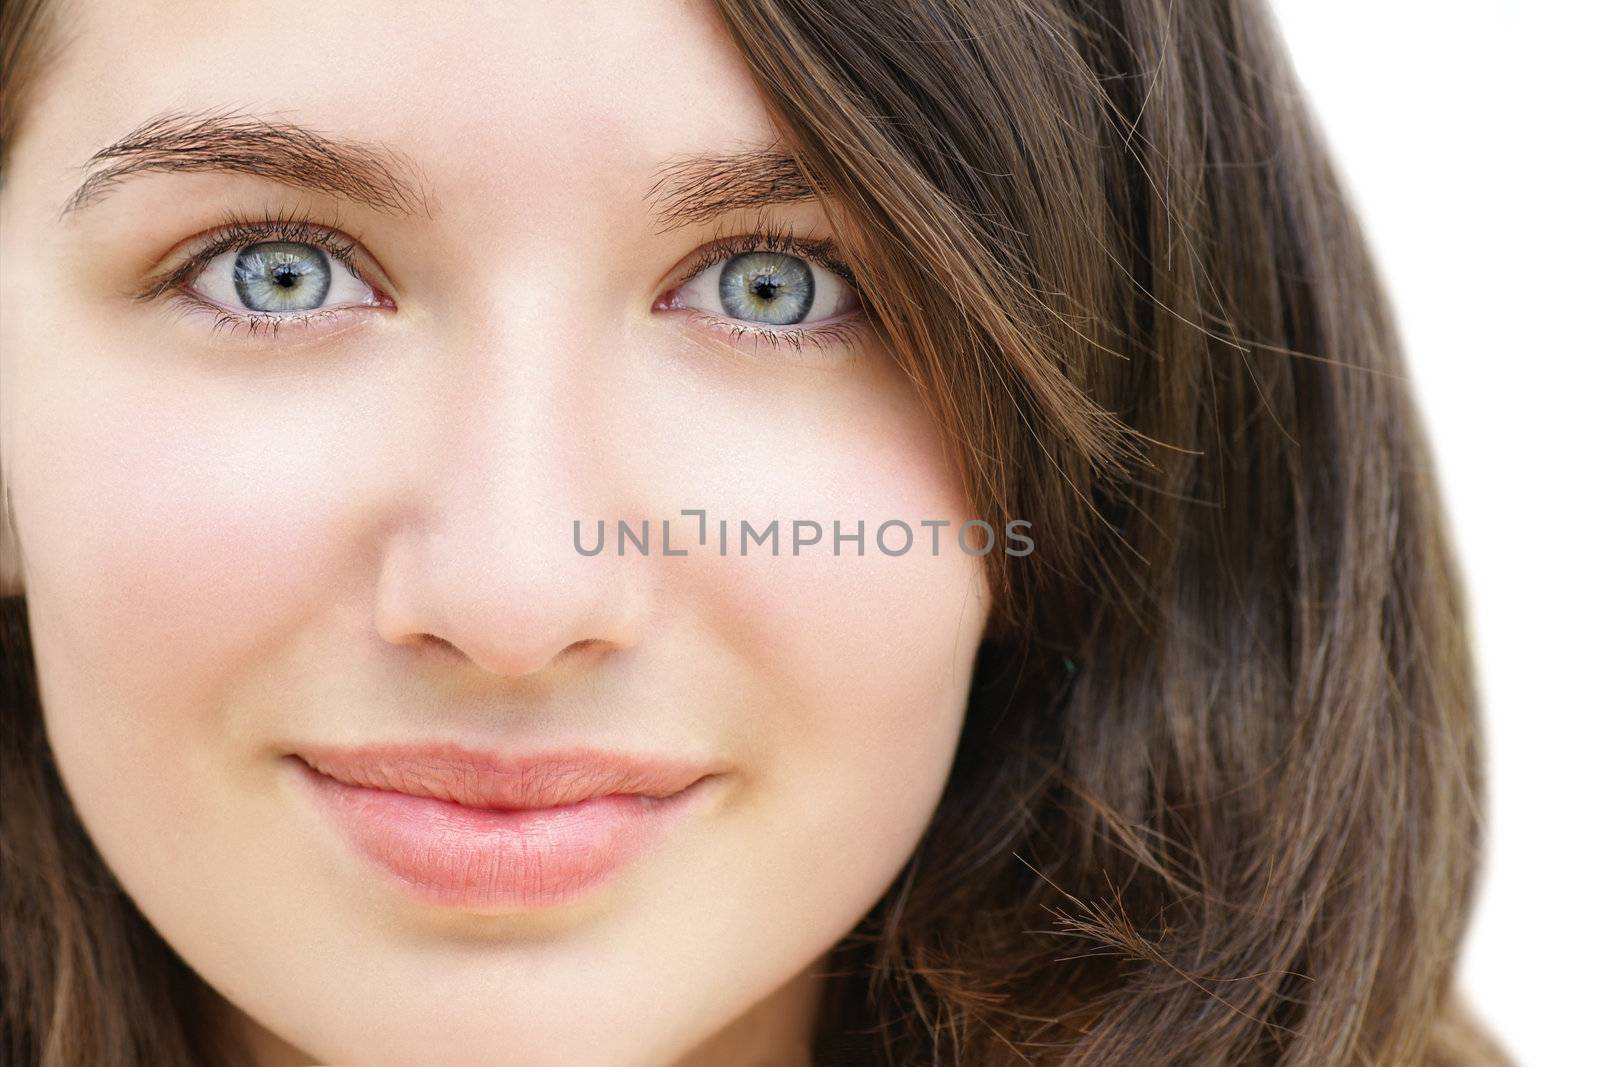 Portrait of a beautiful young woman, teenager or student with stunning light blue eyes and fare skin, looking surprised with her wide eyes and little smile.